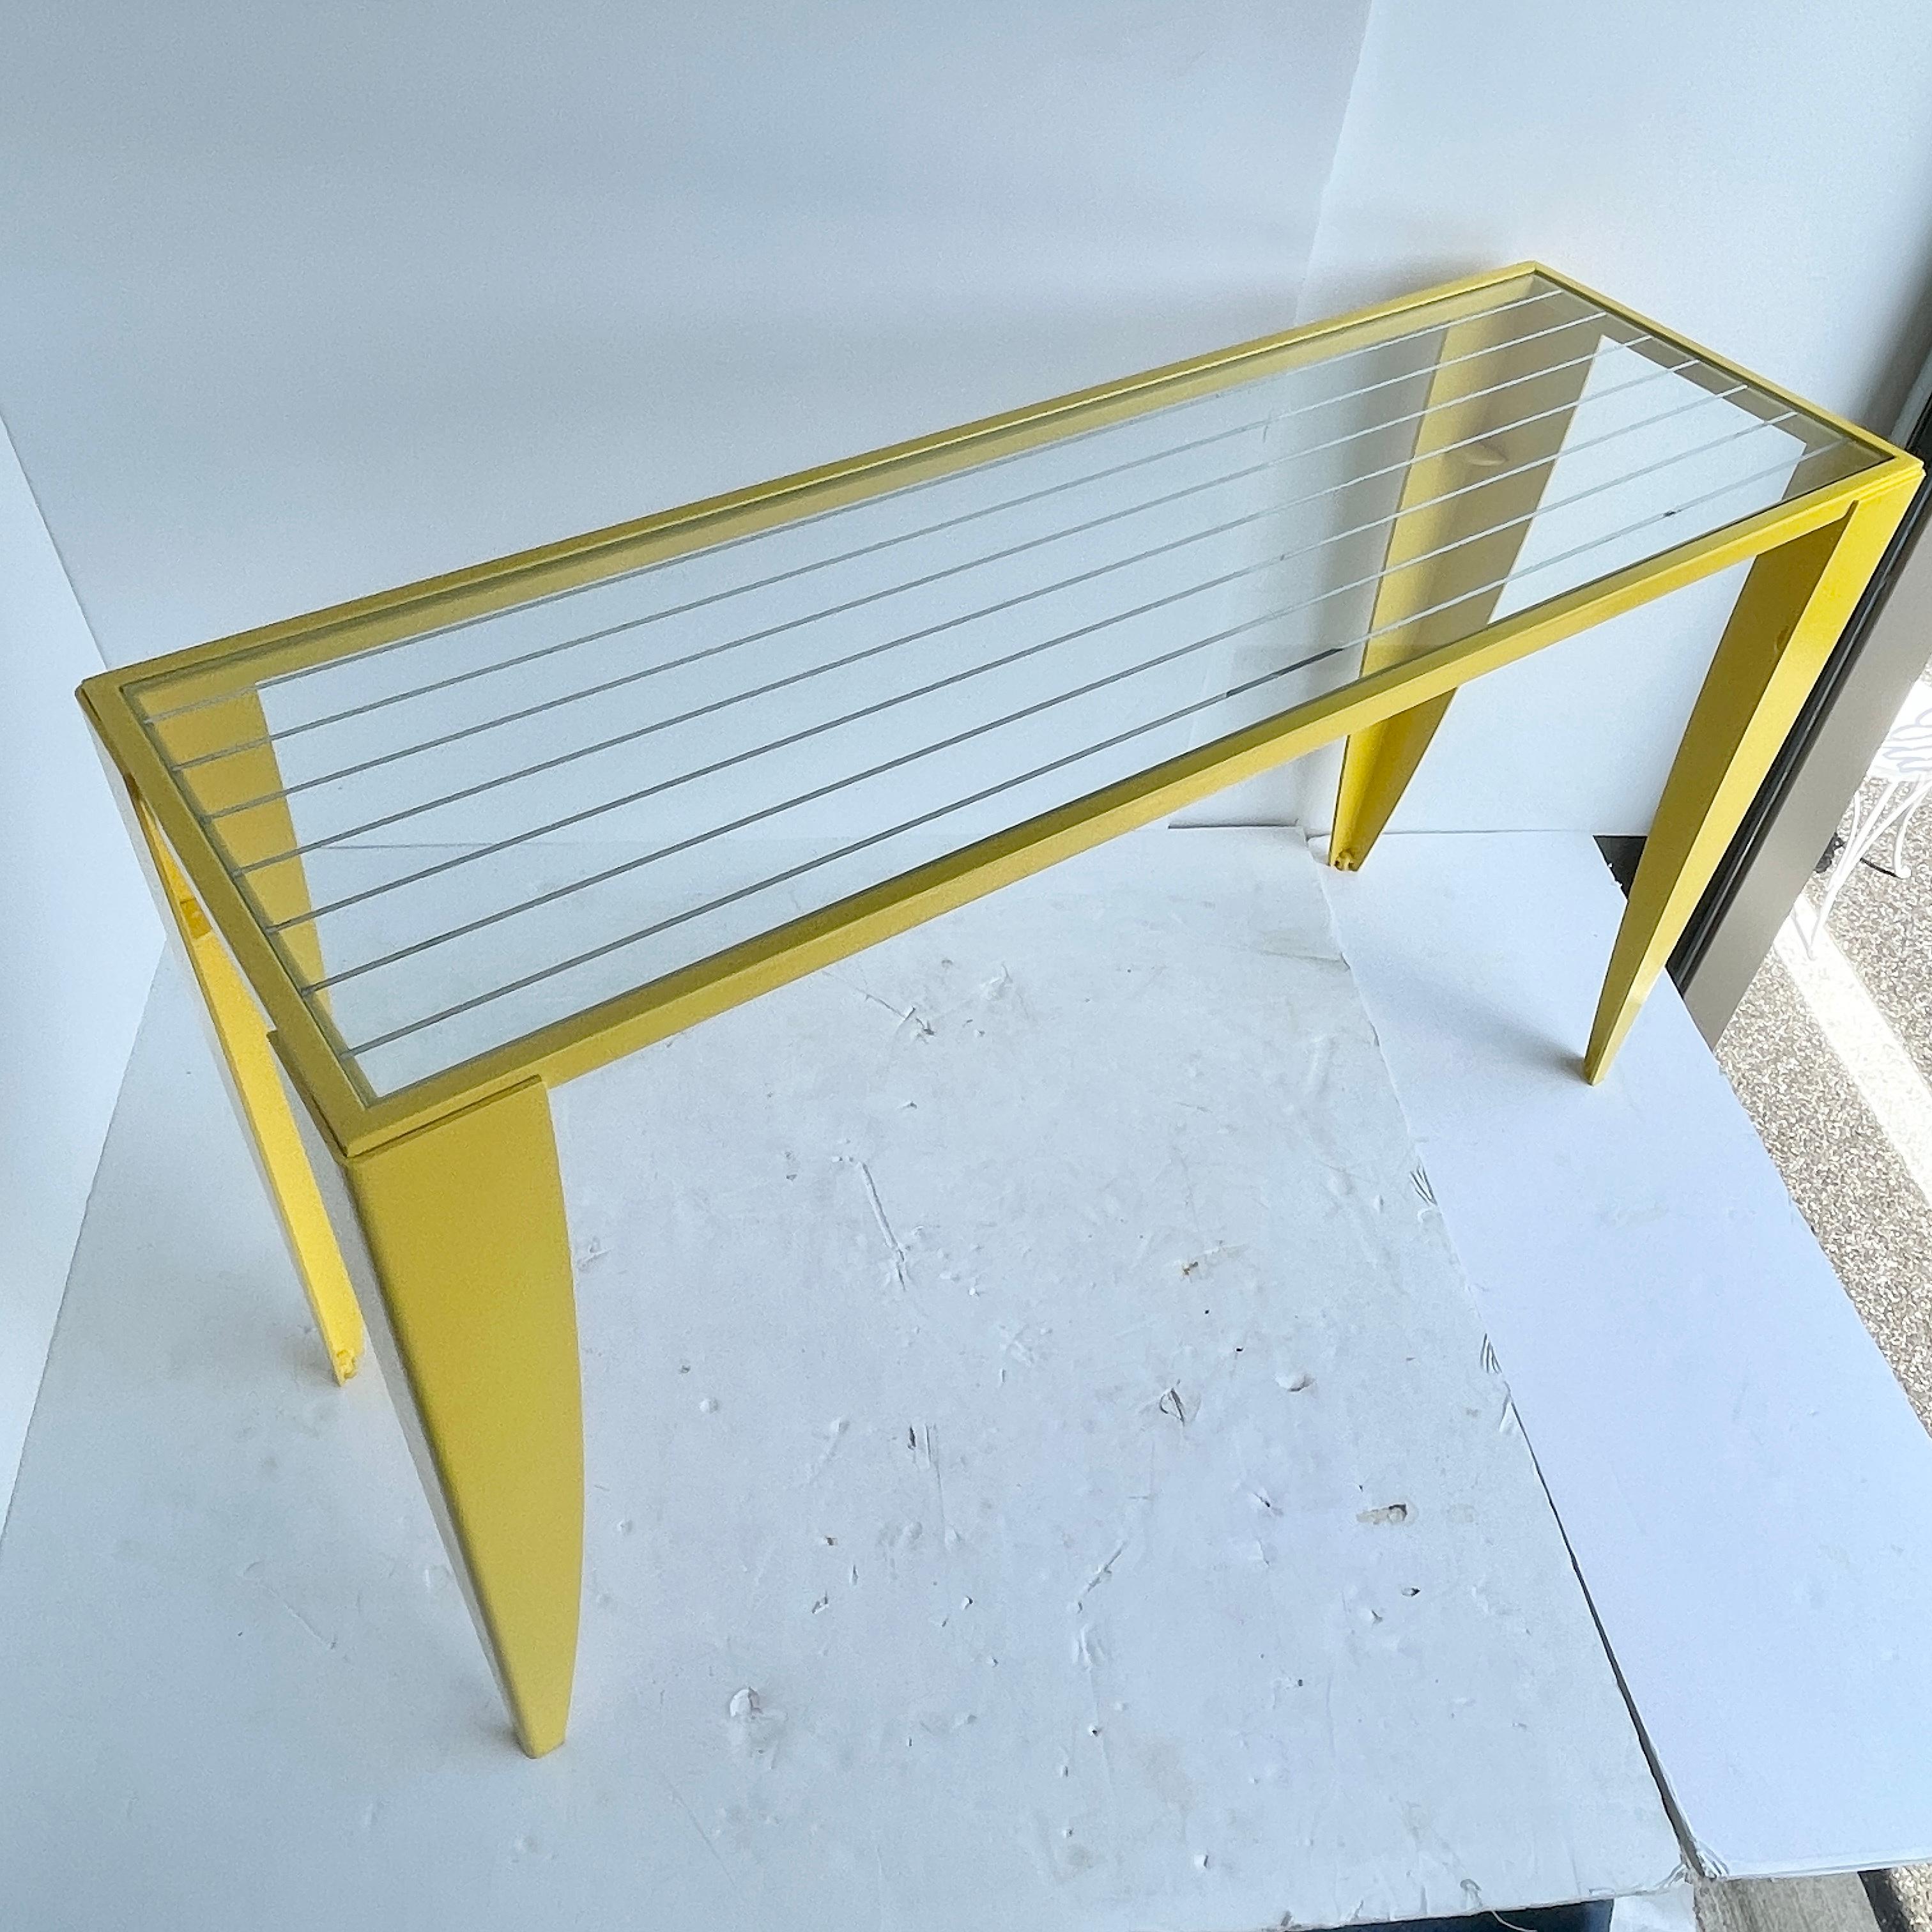 Italian Console Table with Glass Top, Powder Coated Yellow, Mid-Century Modern 1